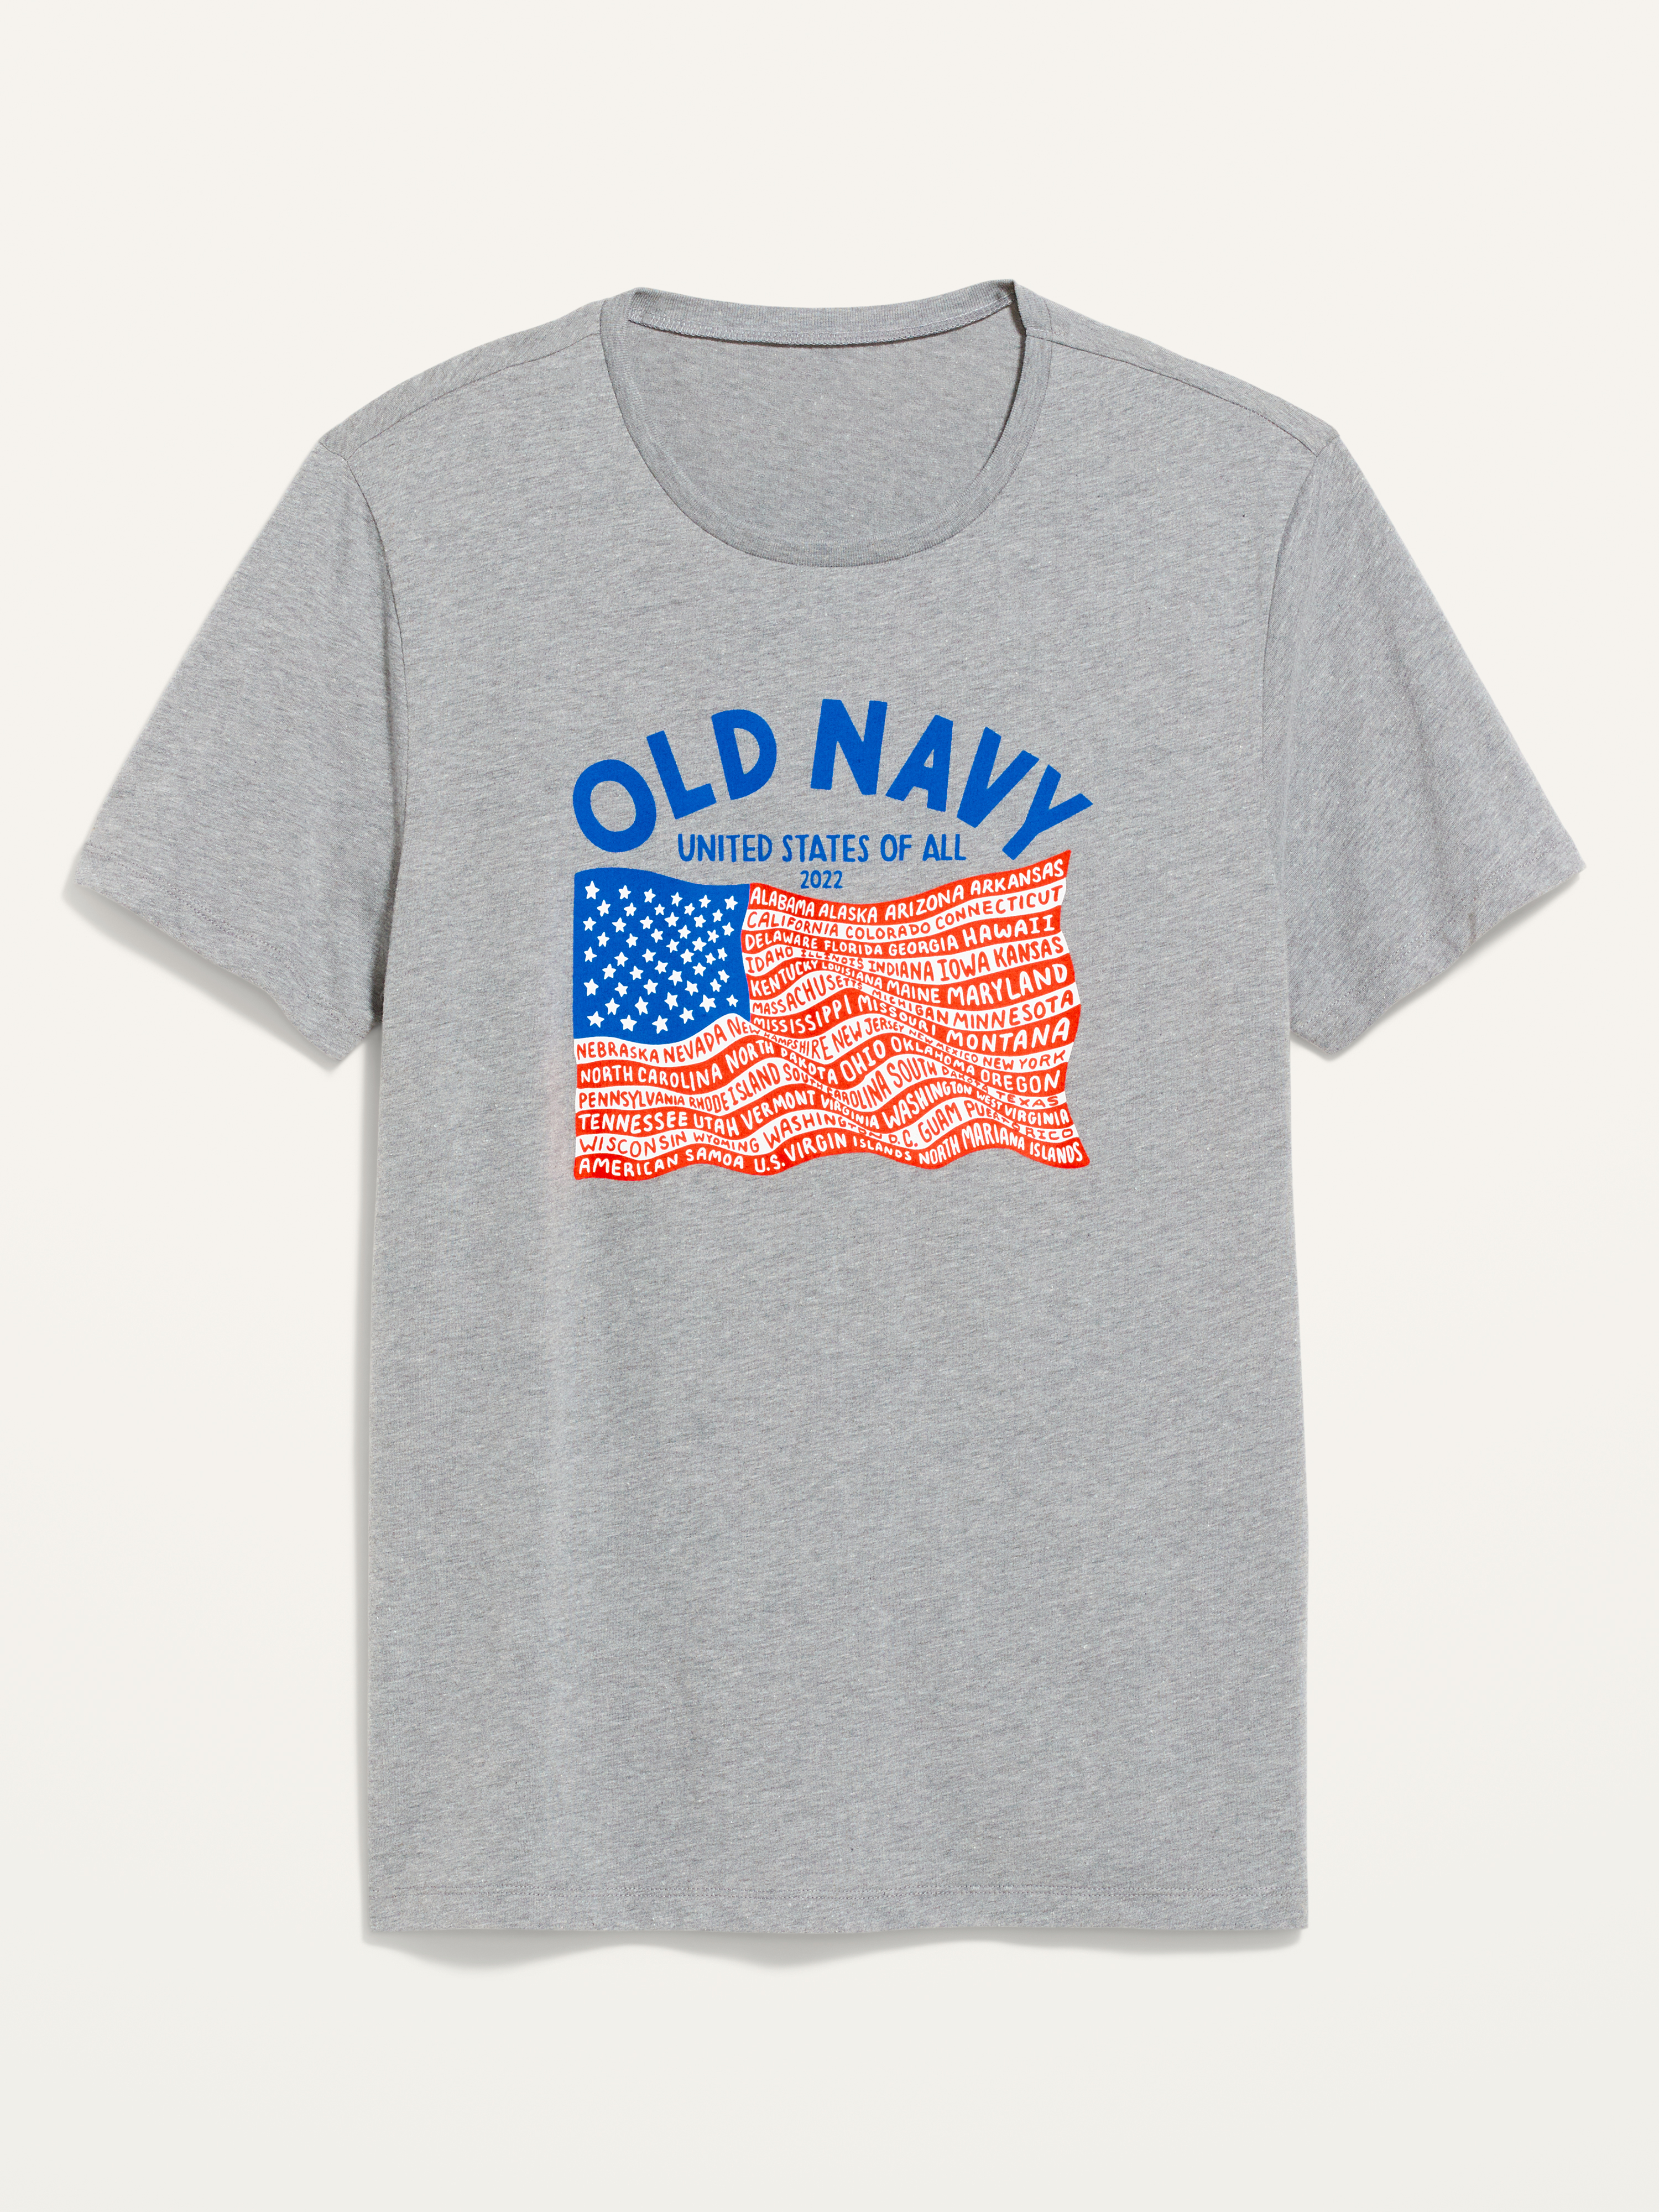 Old Navy American Flag Shirt Size XL — Family Tree Resale 1